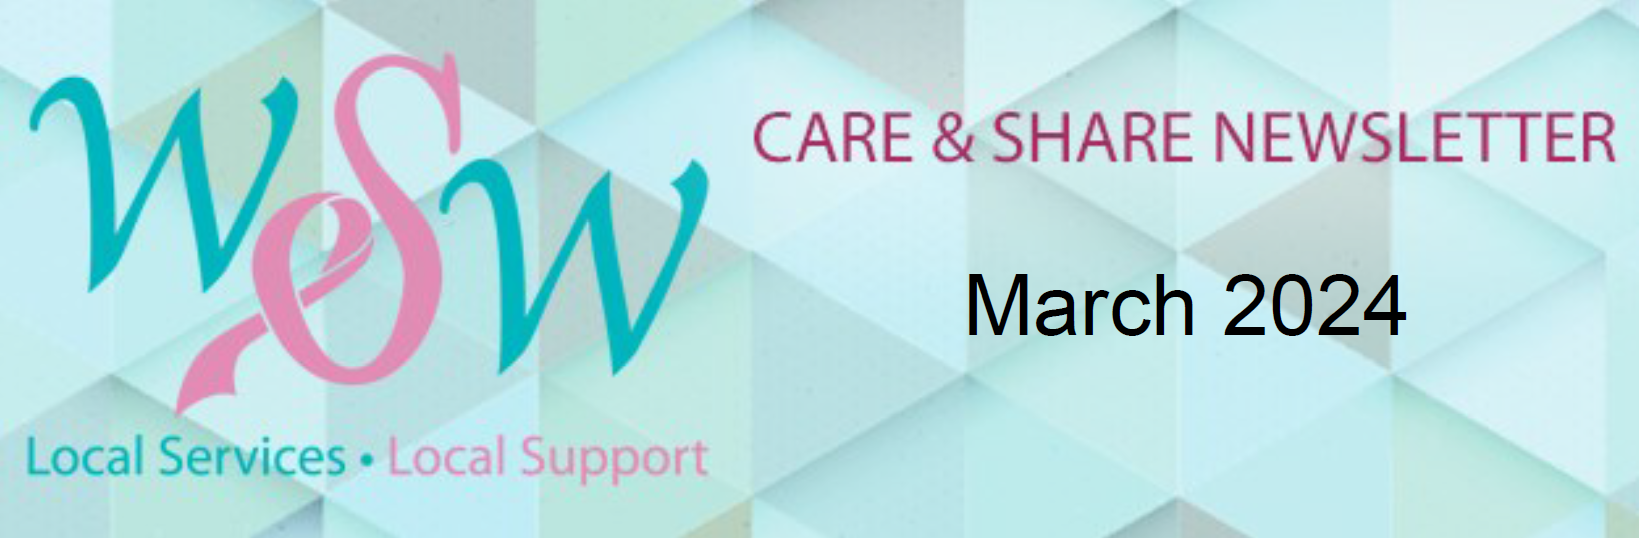 a blue and green banner with the words care & share news letter